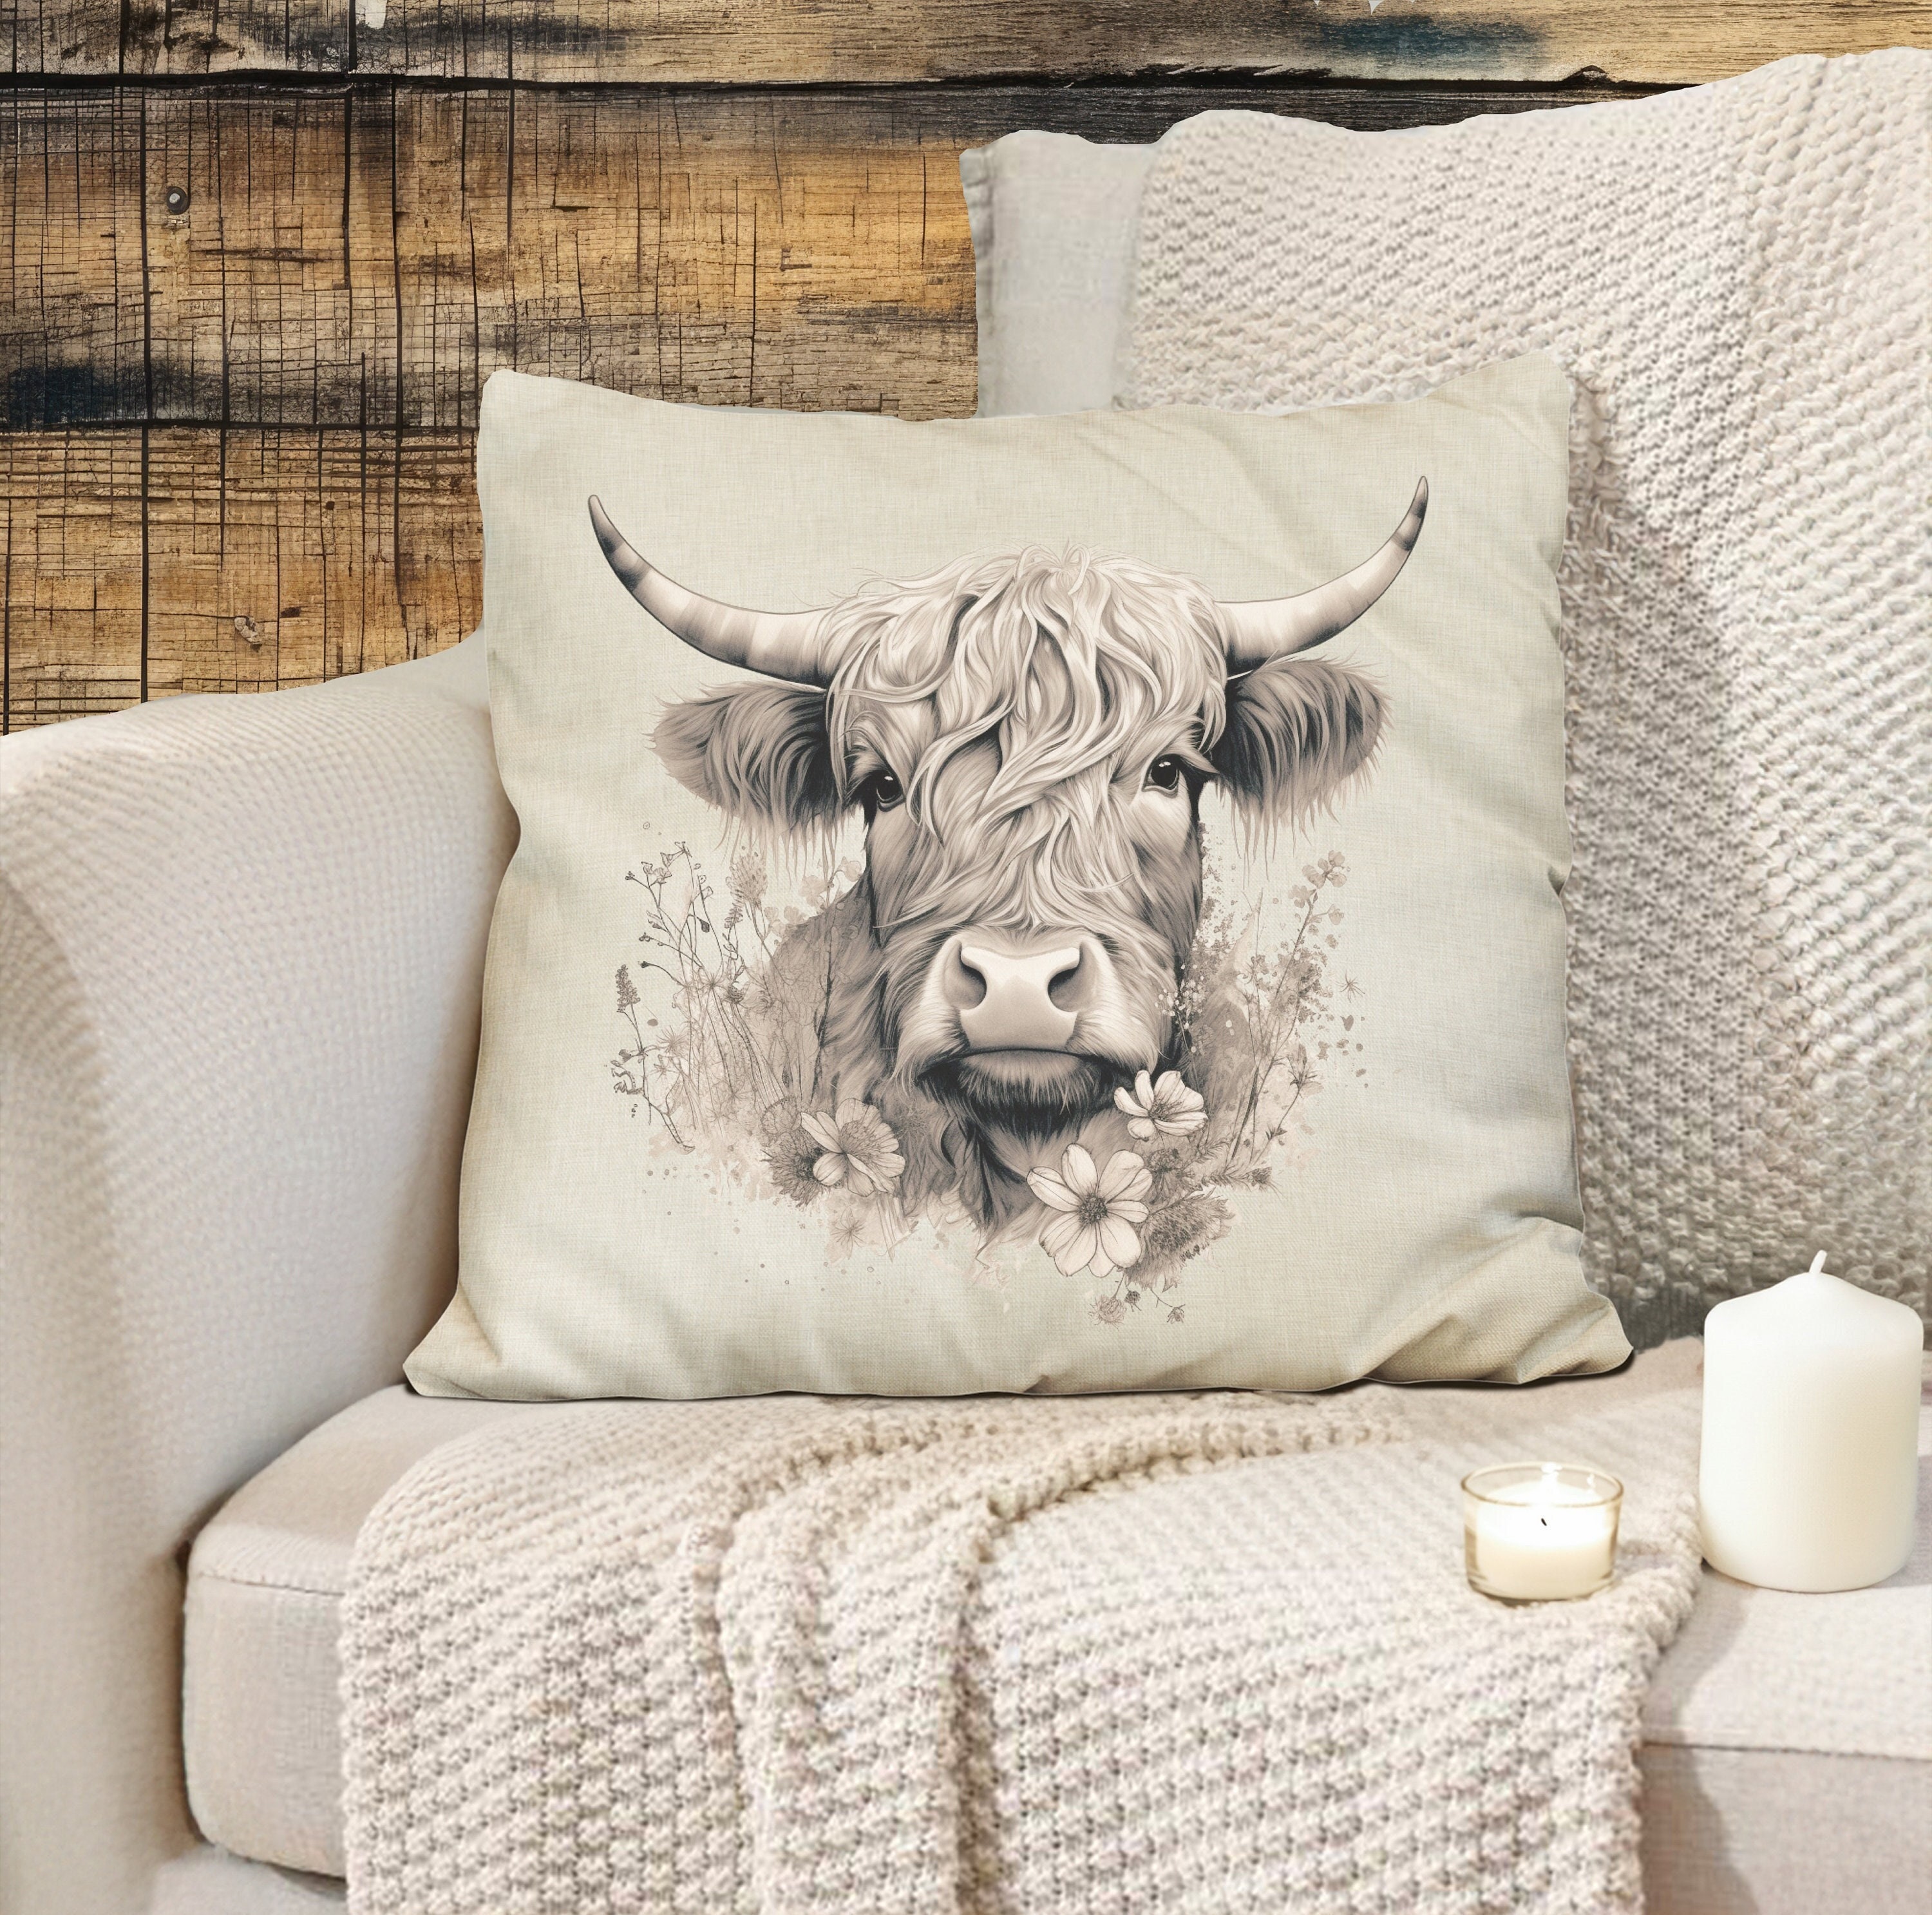 Ambesonne Cow Print Fluffy Throw Pillow Cushion Cover, Animal Cow Hide Pattern Doodle Cartoon Drawing Farming Husbandry, Decorative Square Accent Pill